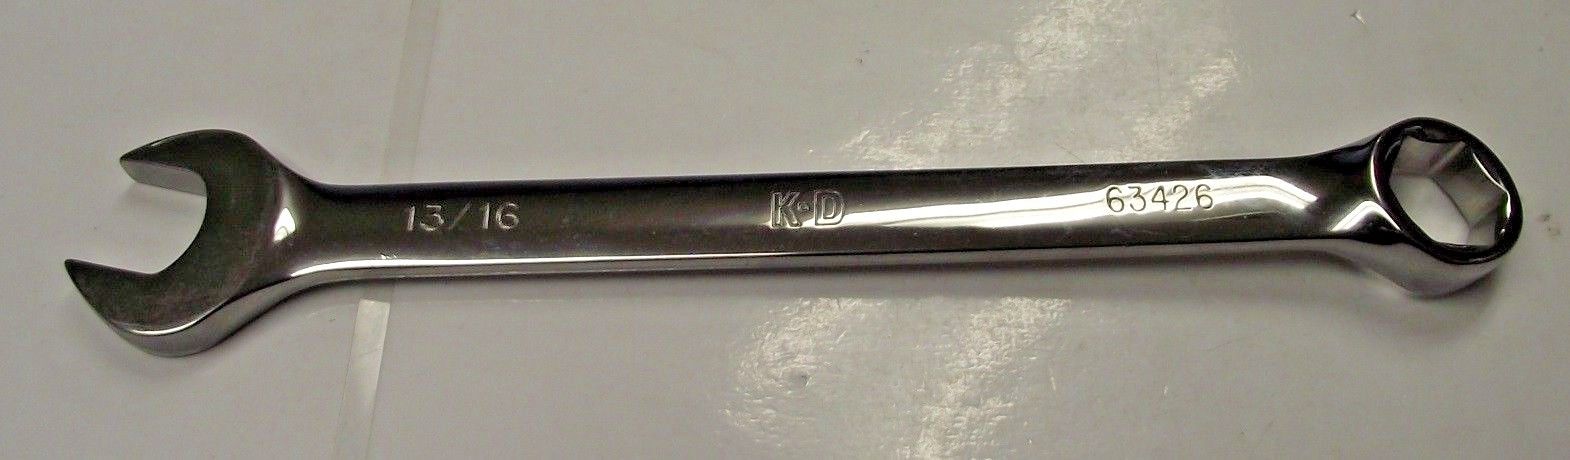 KD Tools 63426 6 point 13/16" Combination Wrench  USA